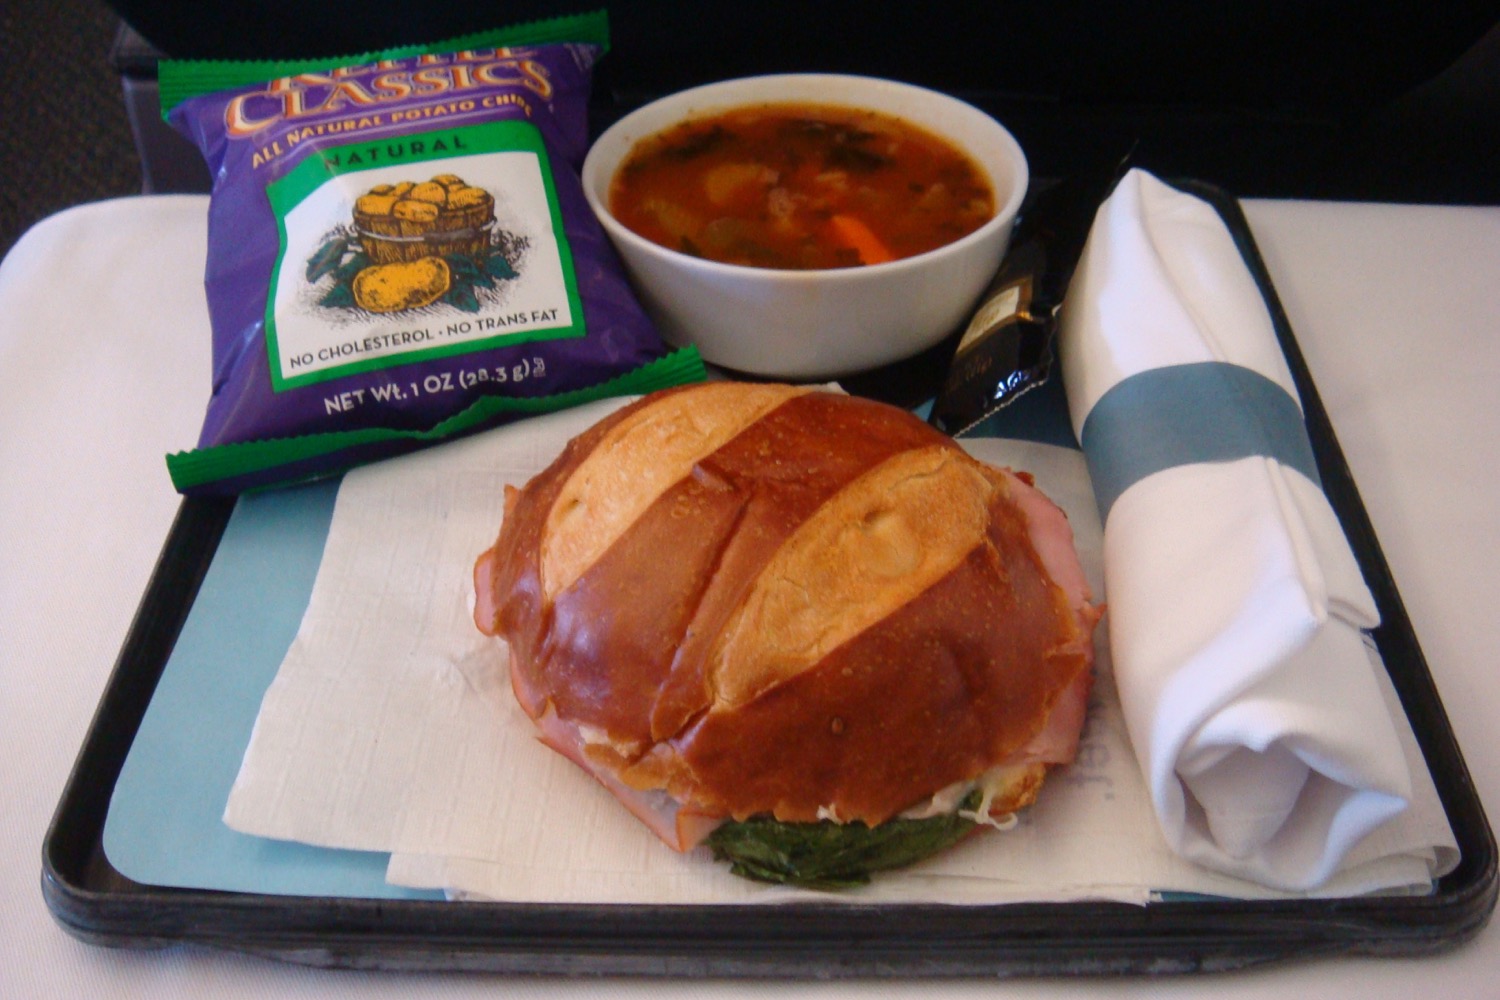 a sandwich and soup on a tray